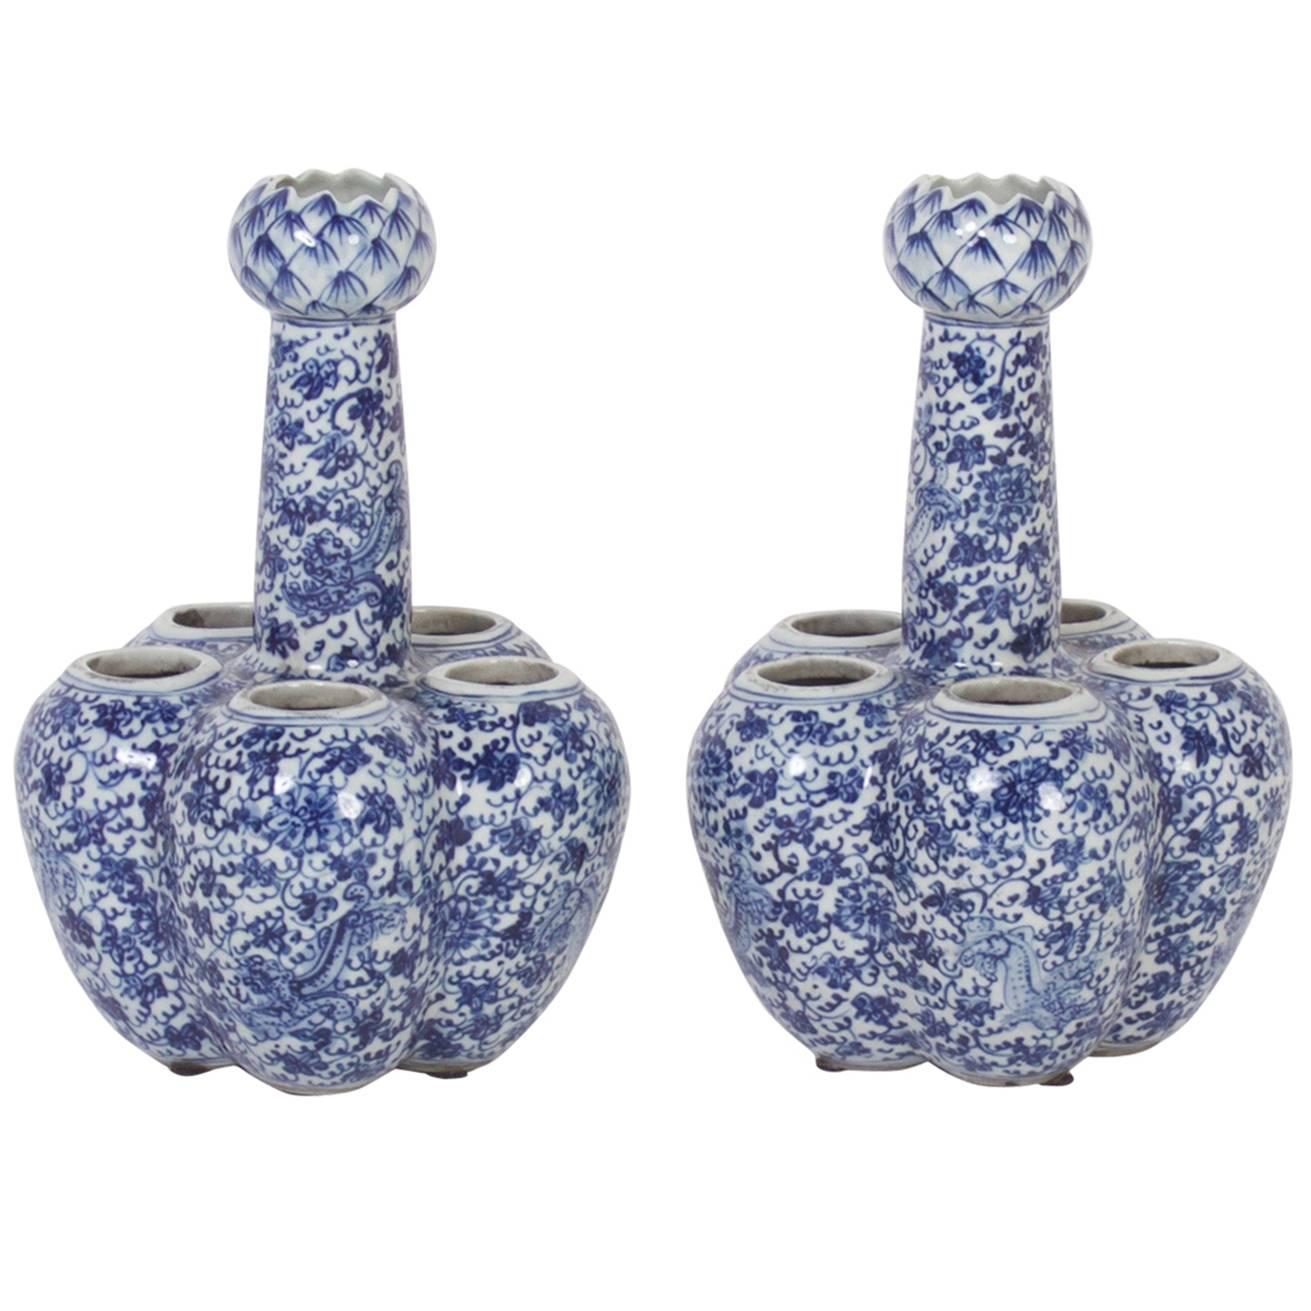 Pair of Chinese Export Style Blue and White Porcelain Tulip Vases